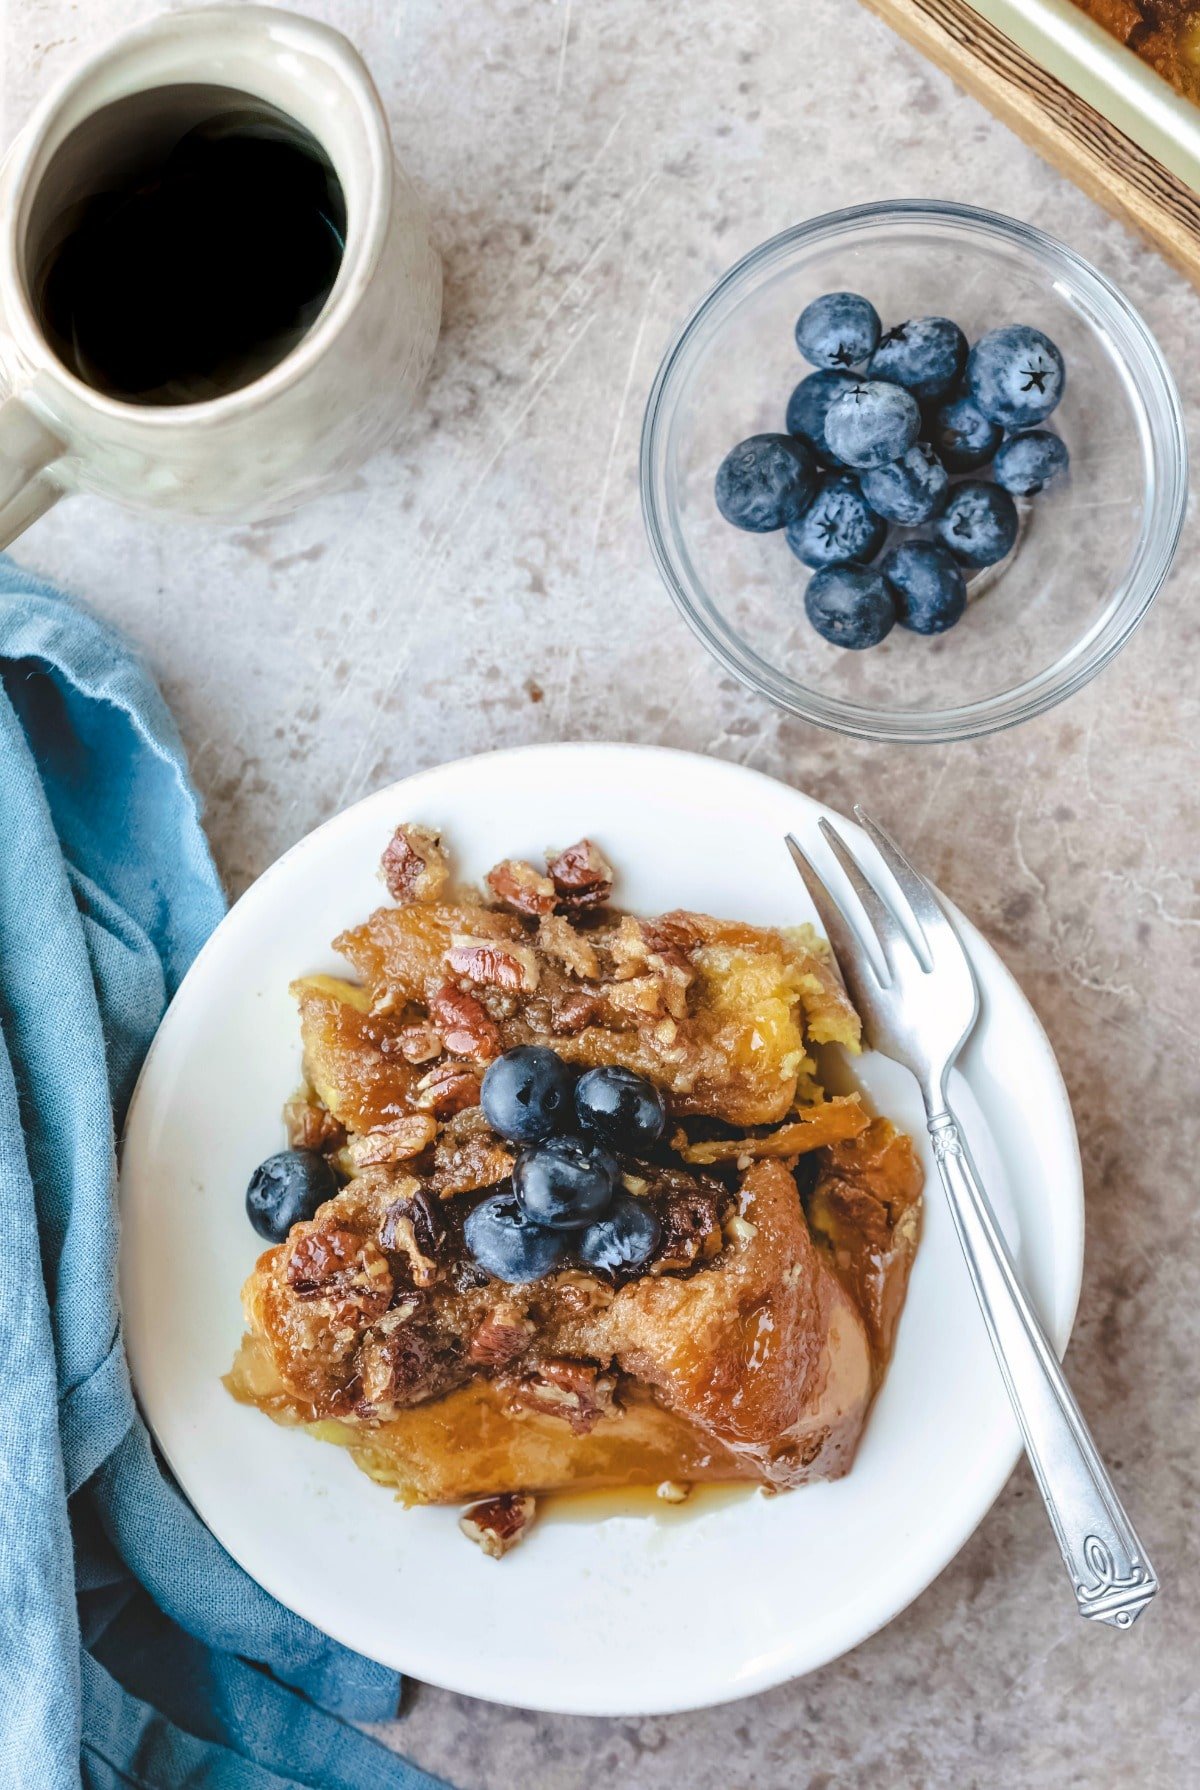 Plate of praline french toast next to a glass dish with blueberries